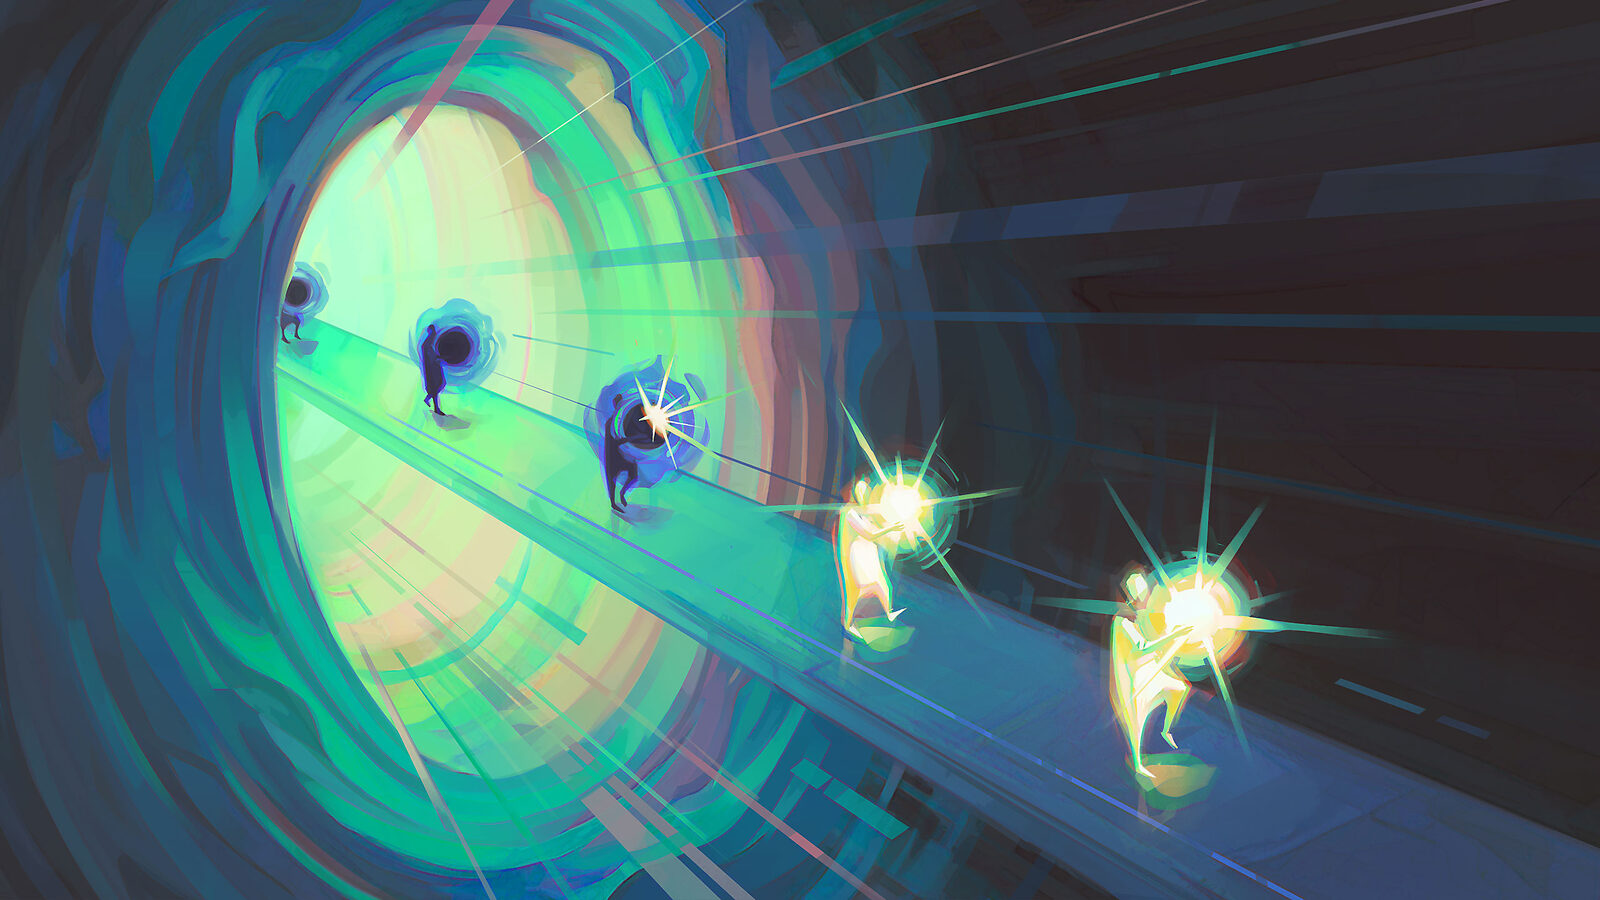 Conceptual illustration of figures carrying particles through a portal